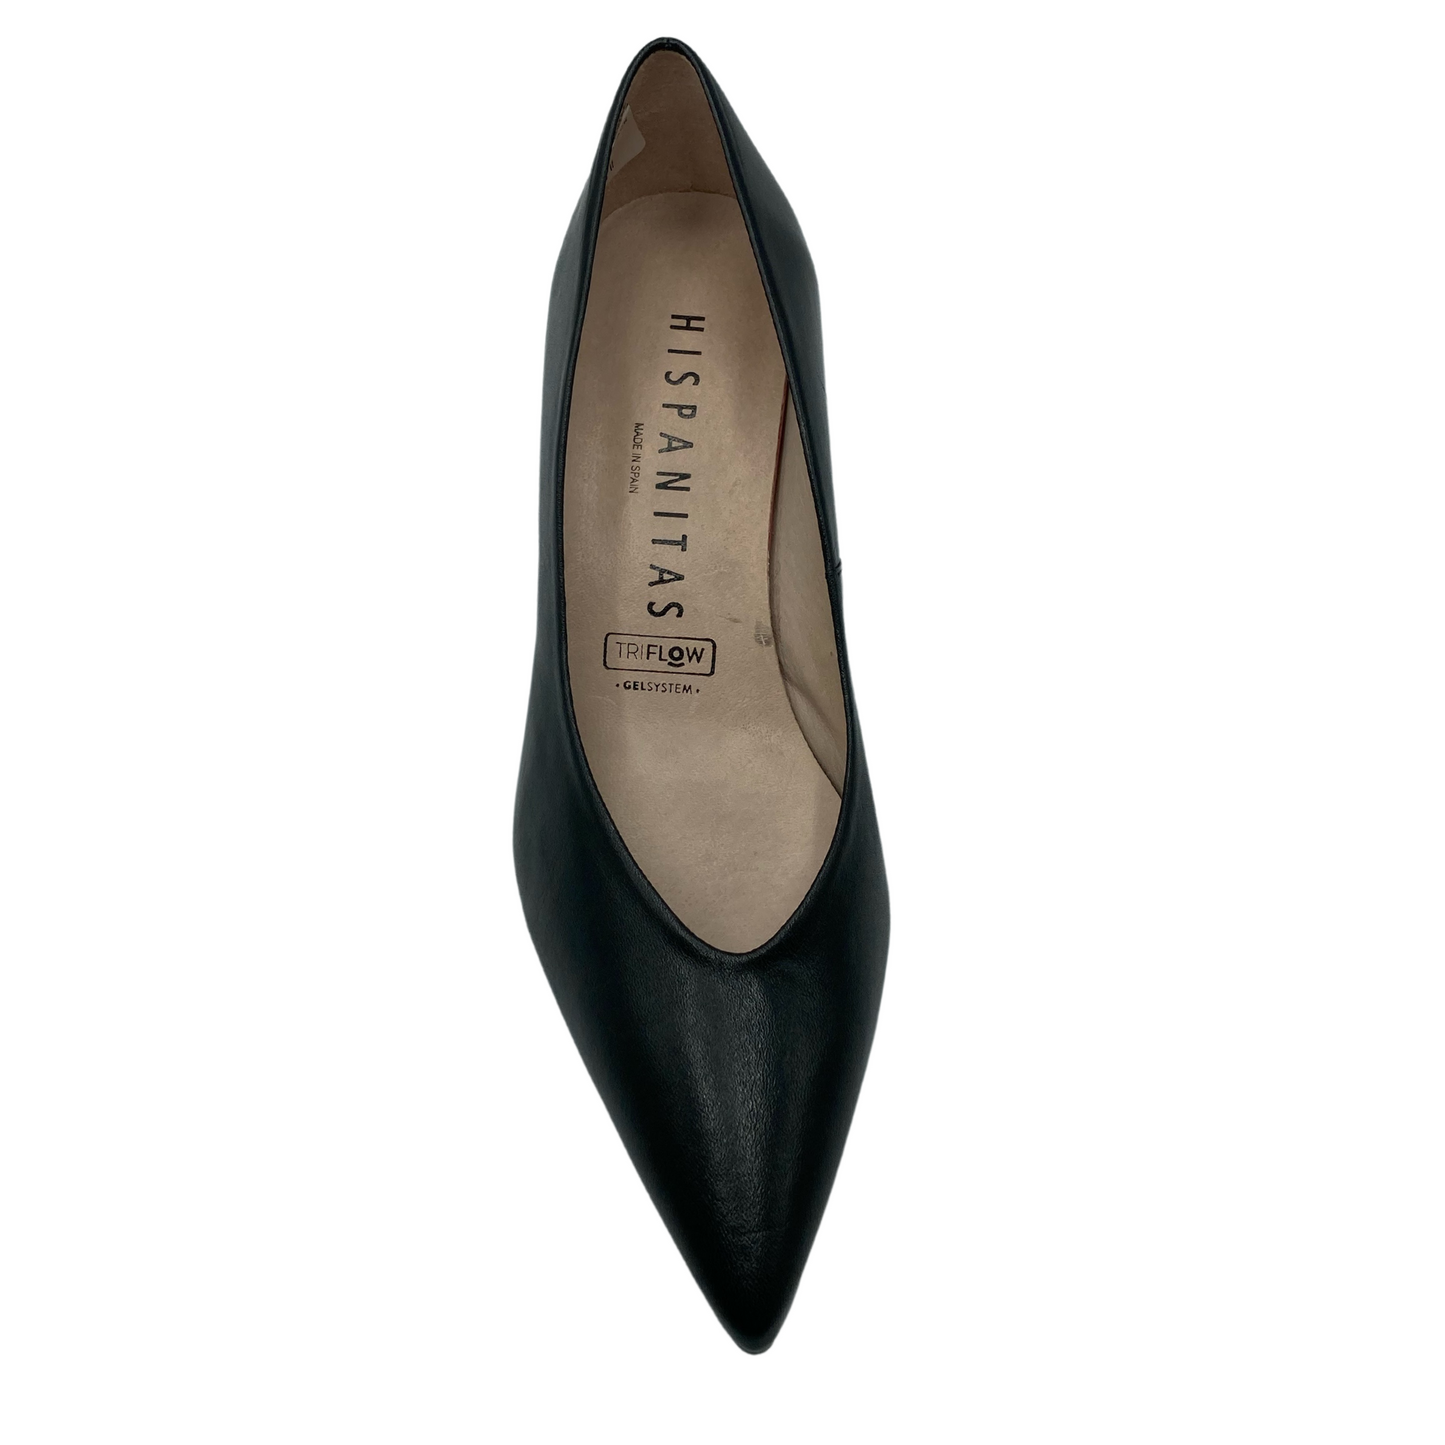 Top view of black leather pump with pointed toe and leather lining